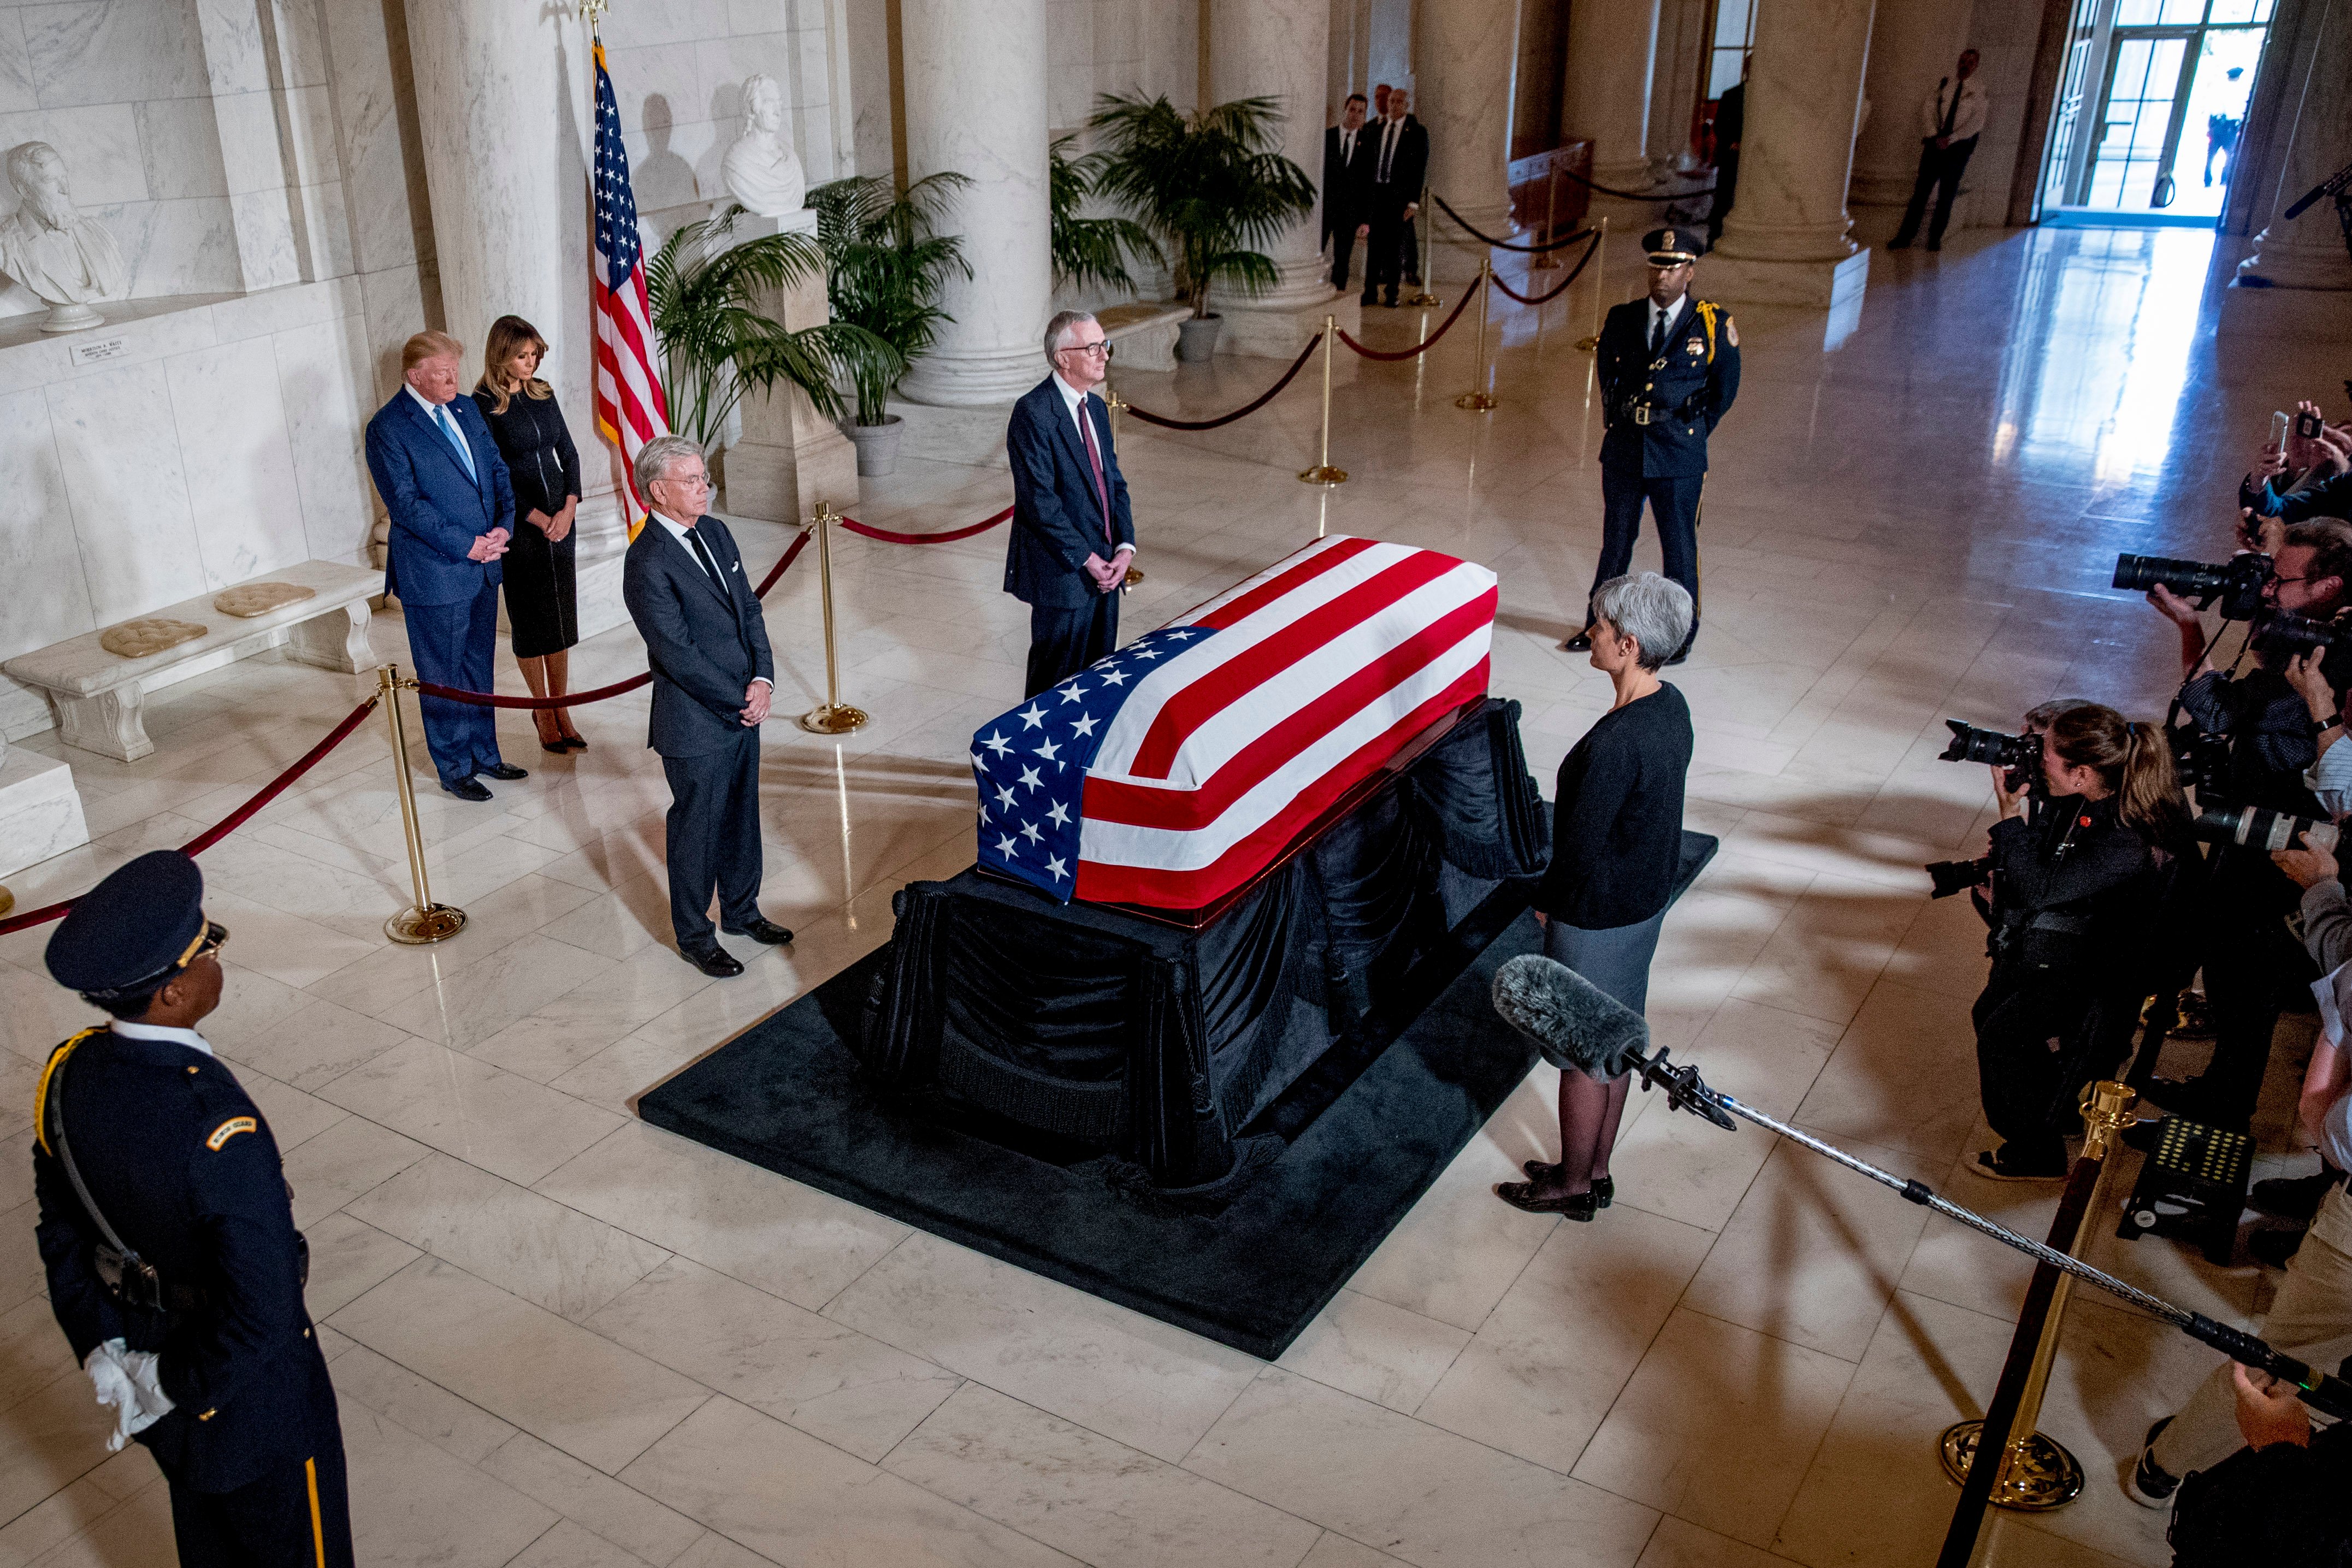 President Donald Trump and first lady Melania Trump pay their respects as the late Justice John Paul Stevens lies in repose in the great hall of the Supreme Court. (Andrew Harnik/AFP/Getty Images)